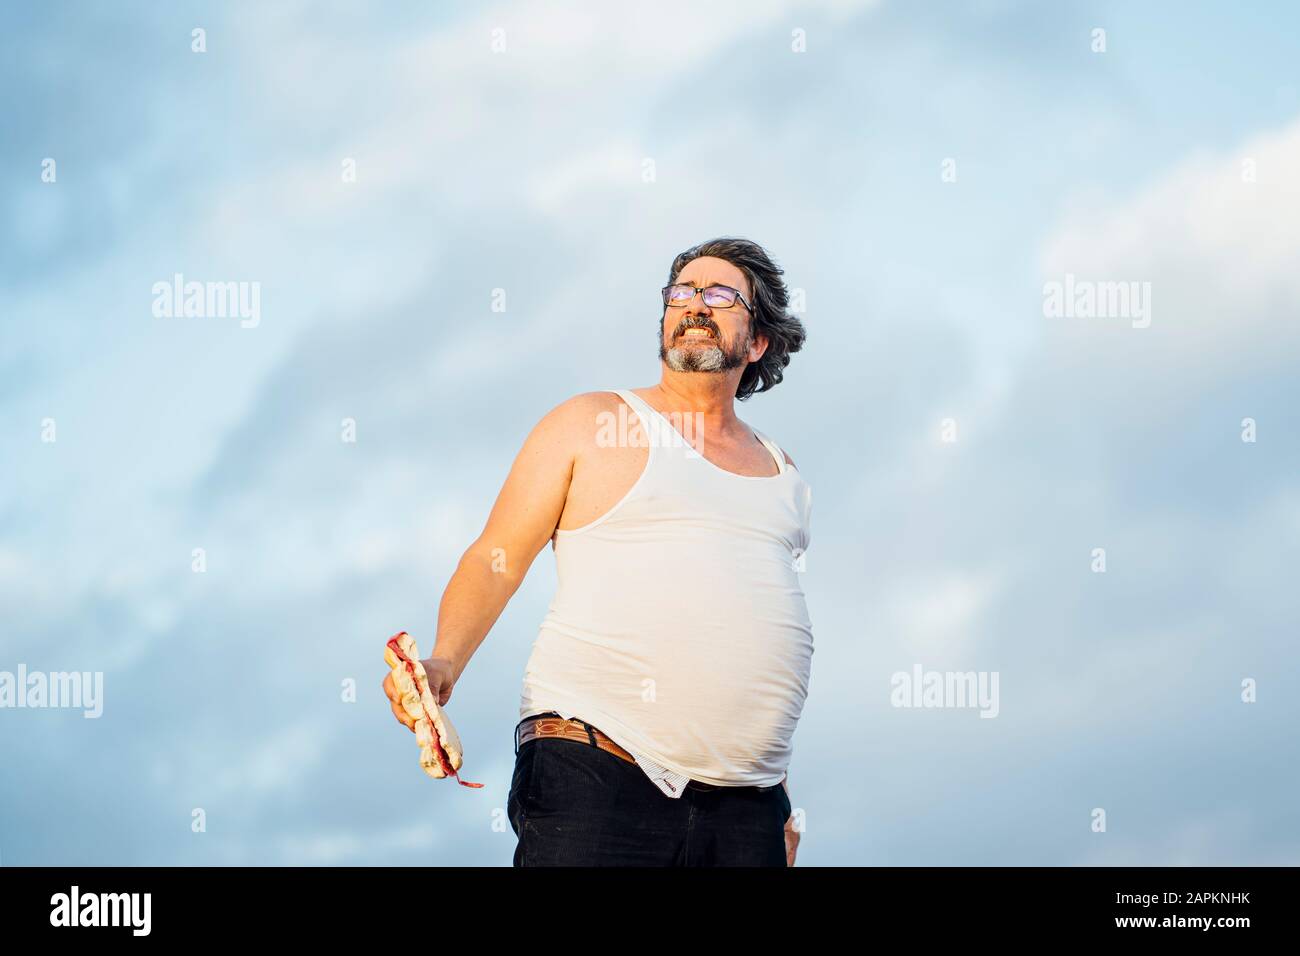 Man with beer belly holding sandwich Stock Photo